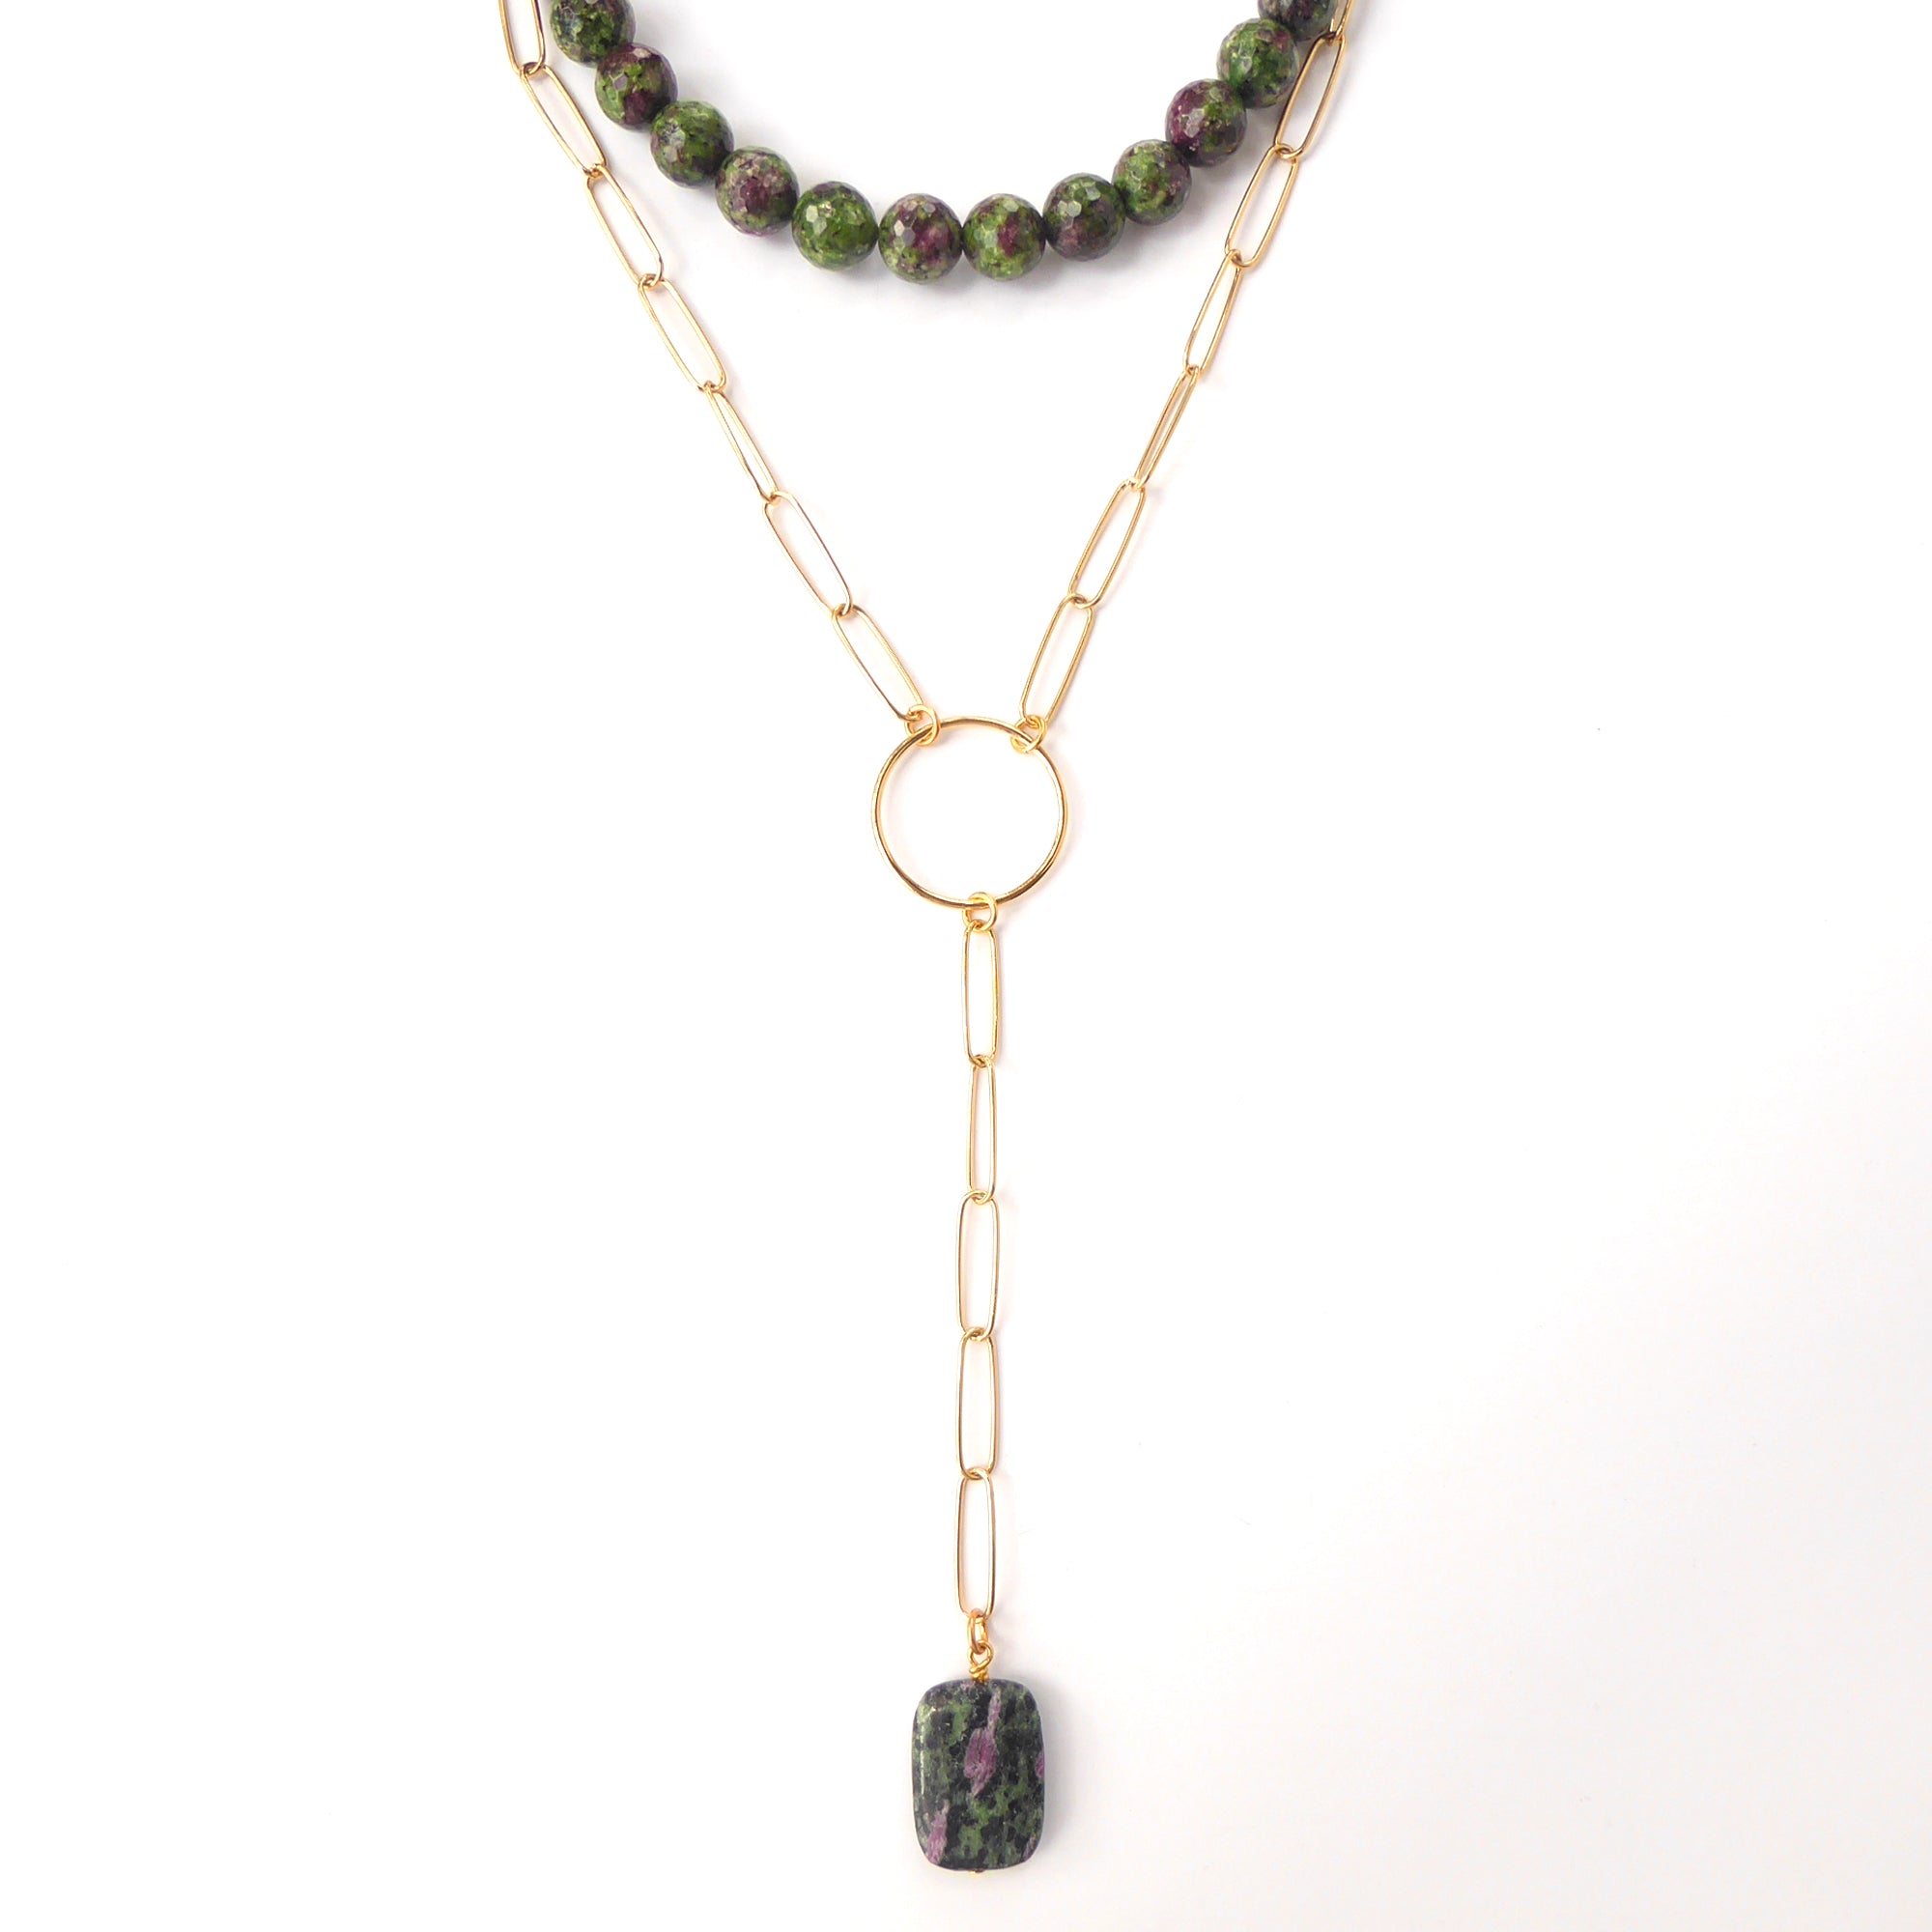 Ruby in zoisite necklace by Jenny Dayco 4